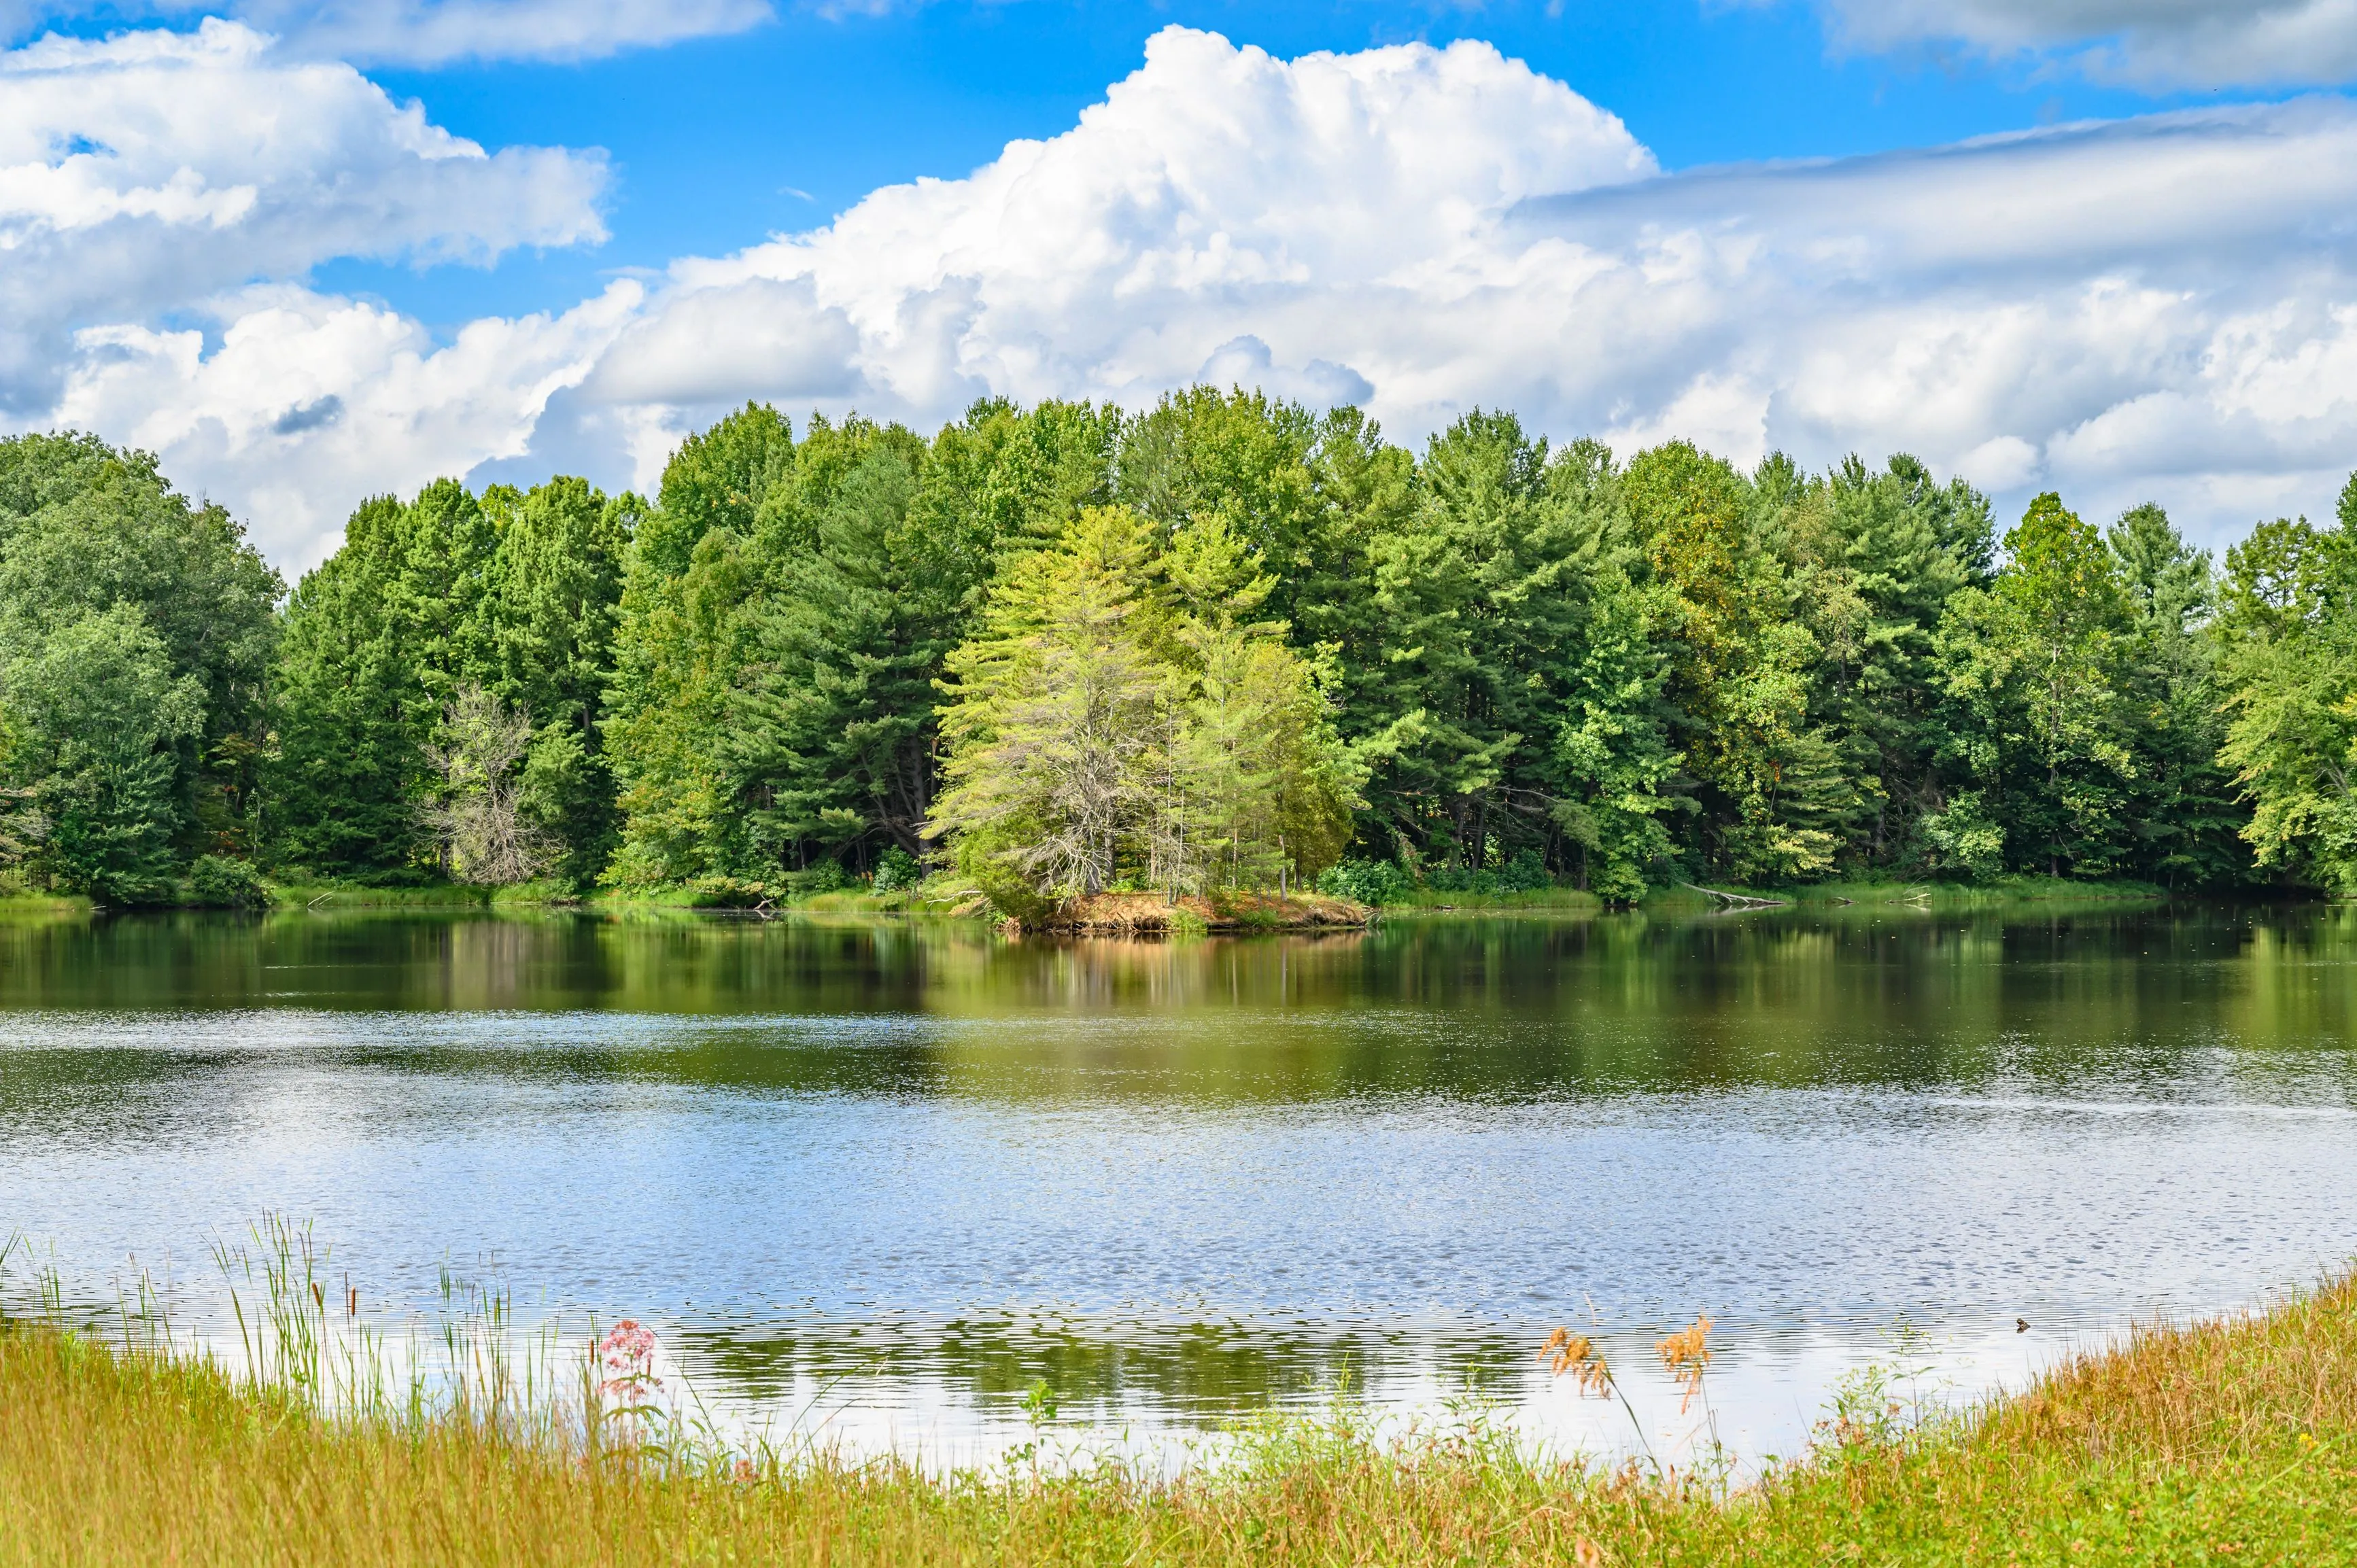 Scenic view of a peaceful lake surrounded by lush green trees under a blue sky with white clouds.